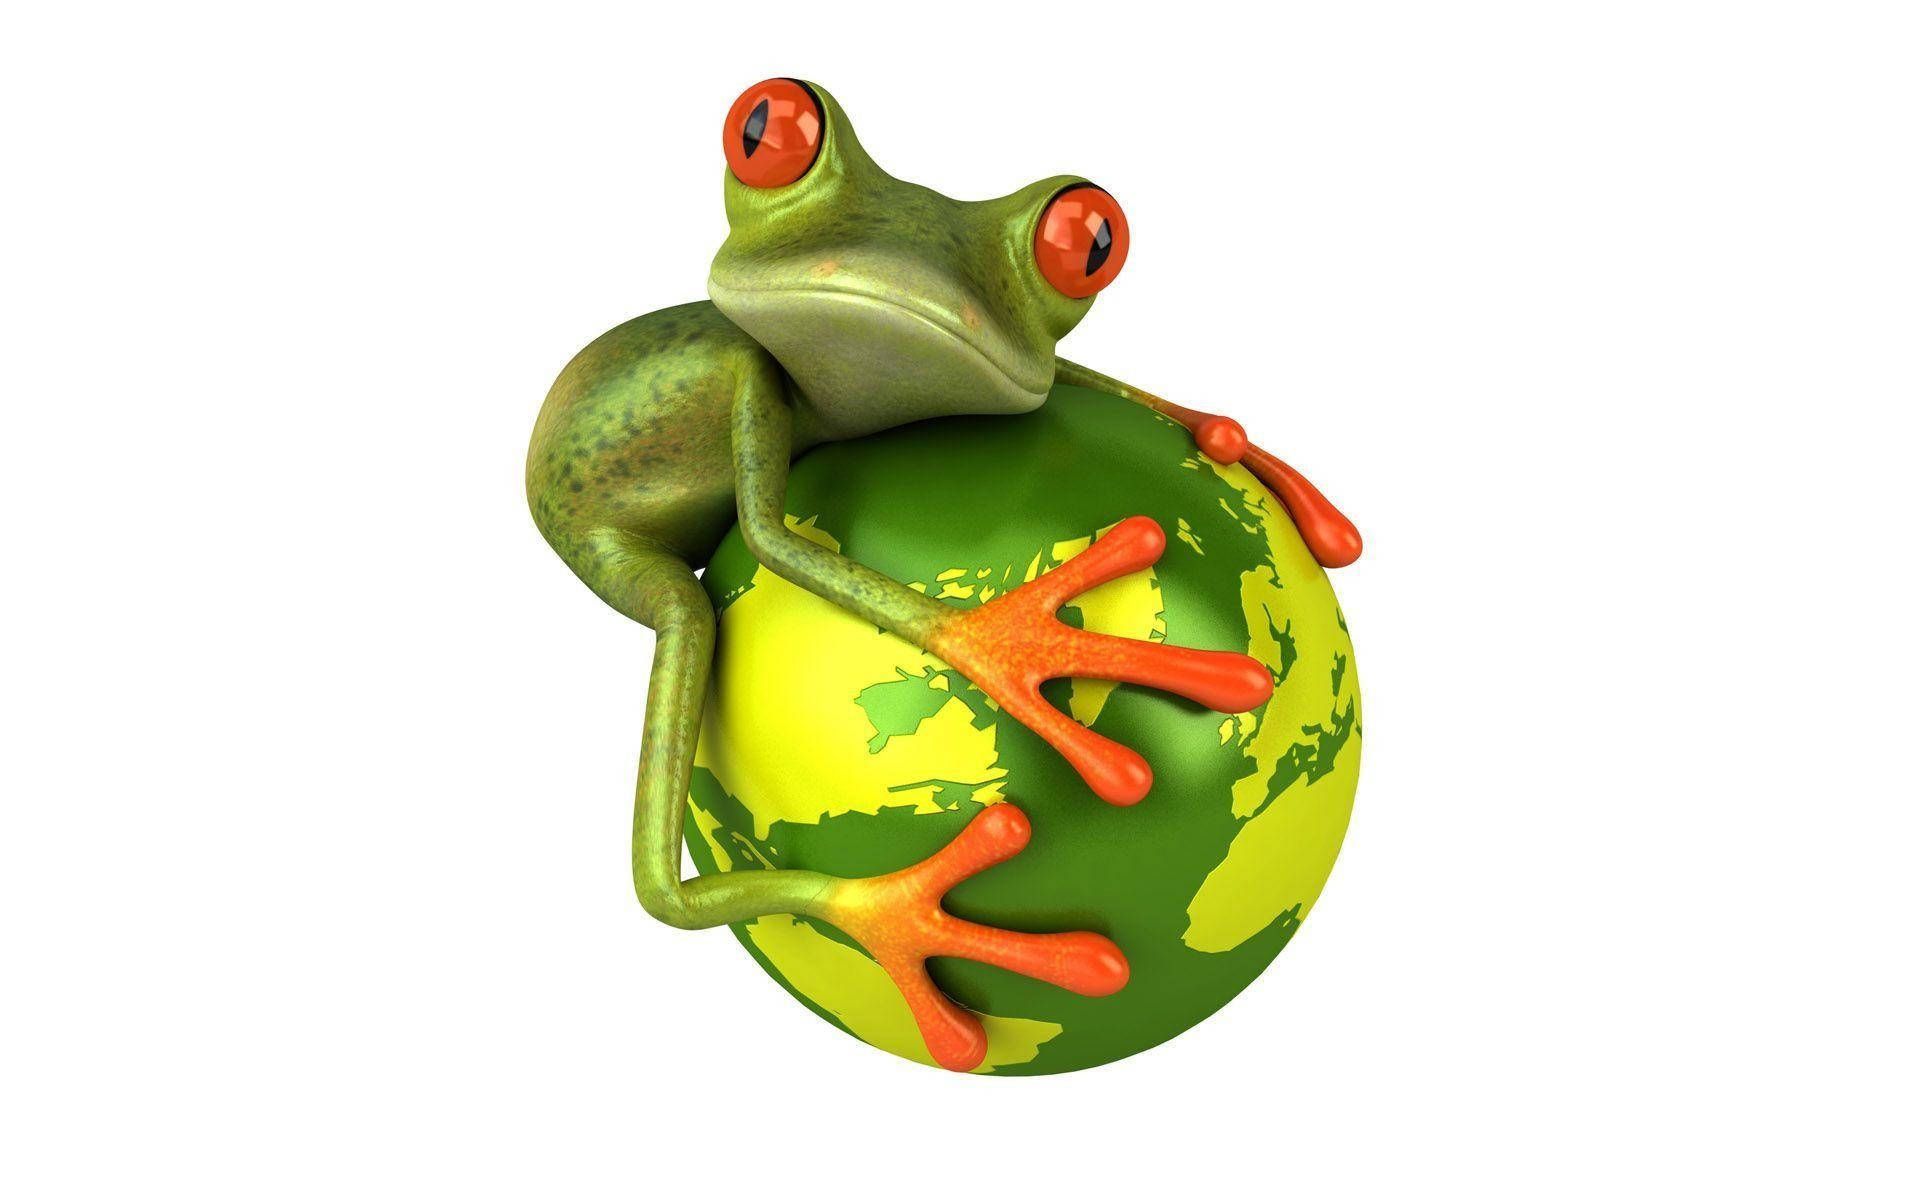 A frog sitting on top of a globe. - Frog